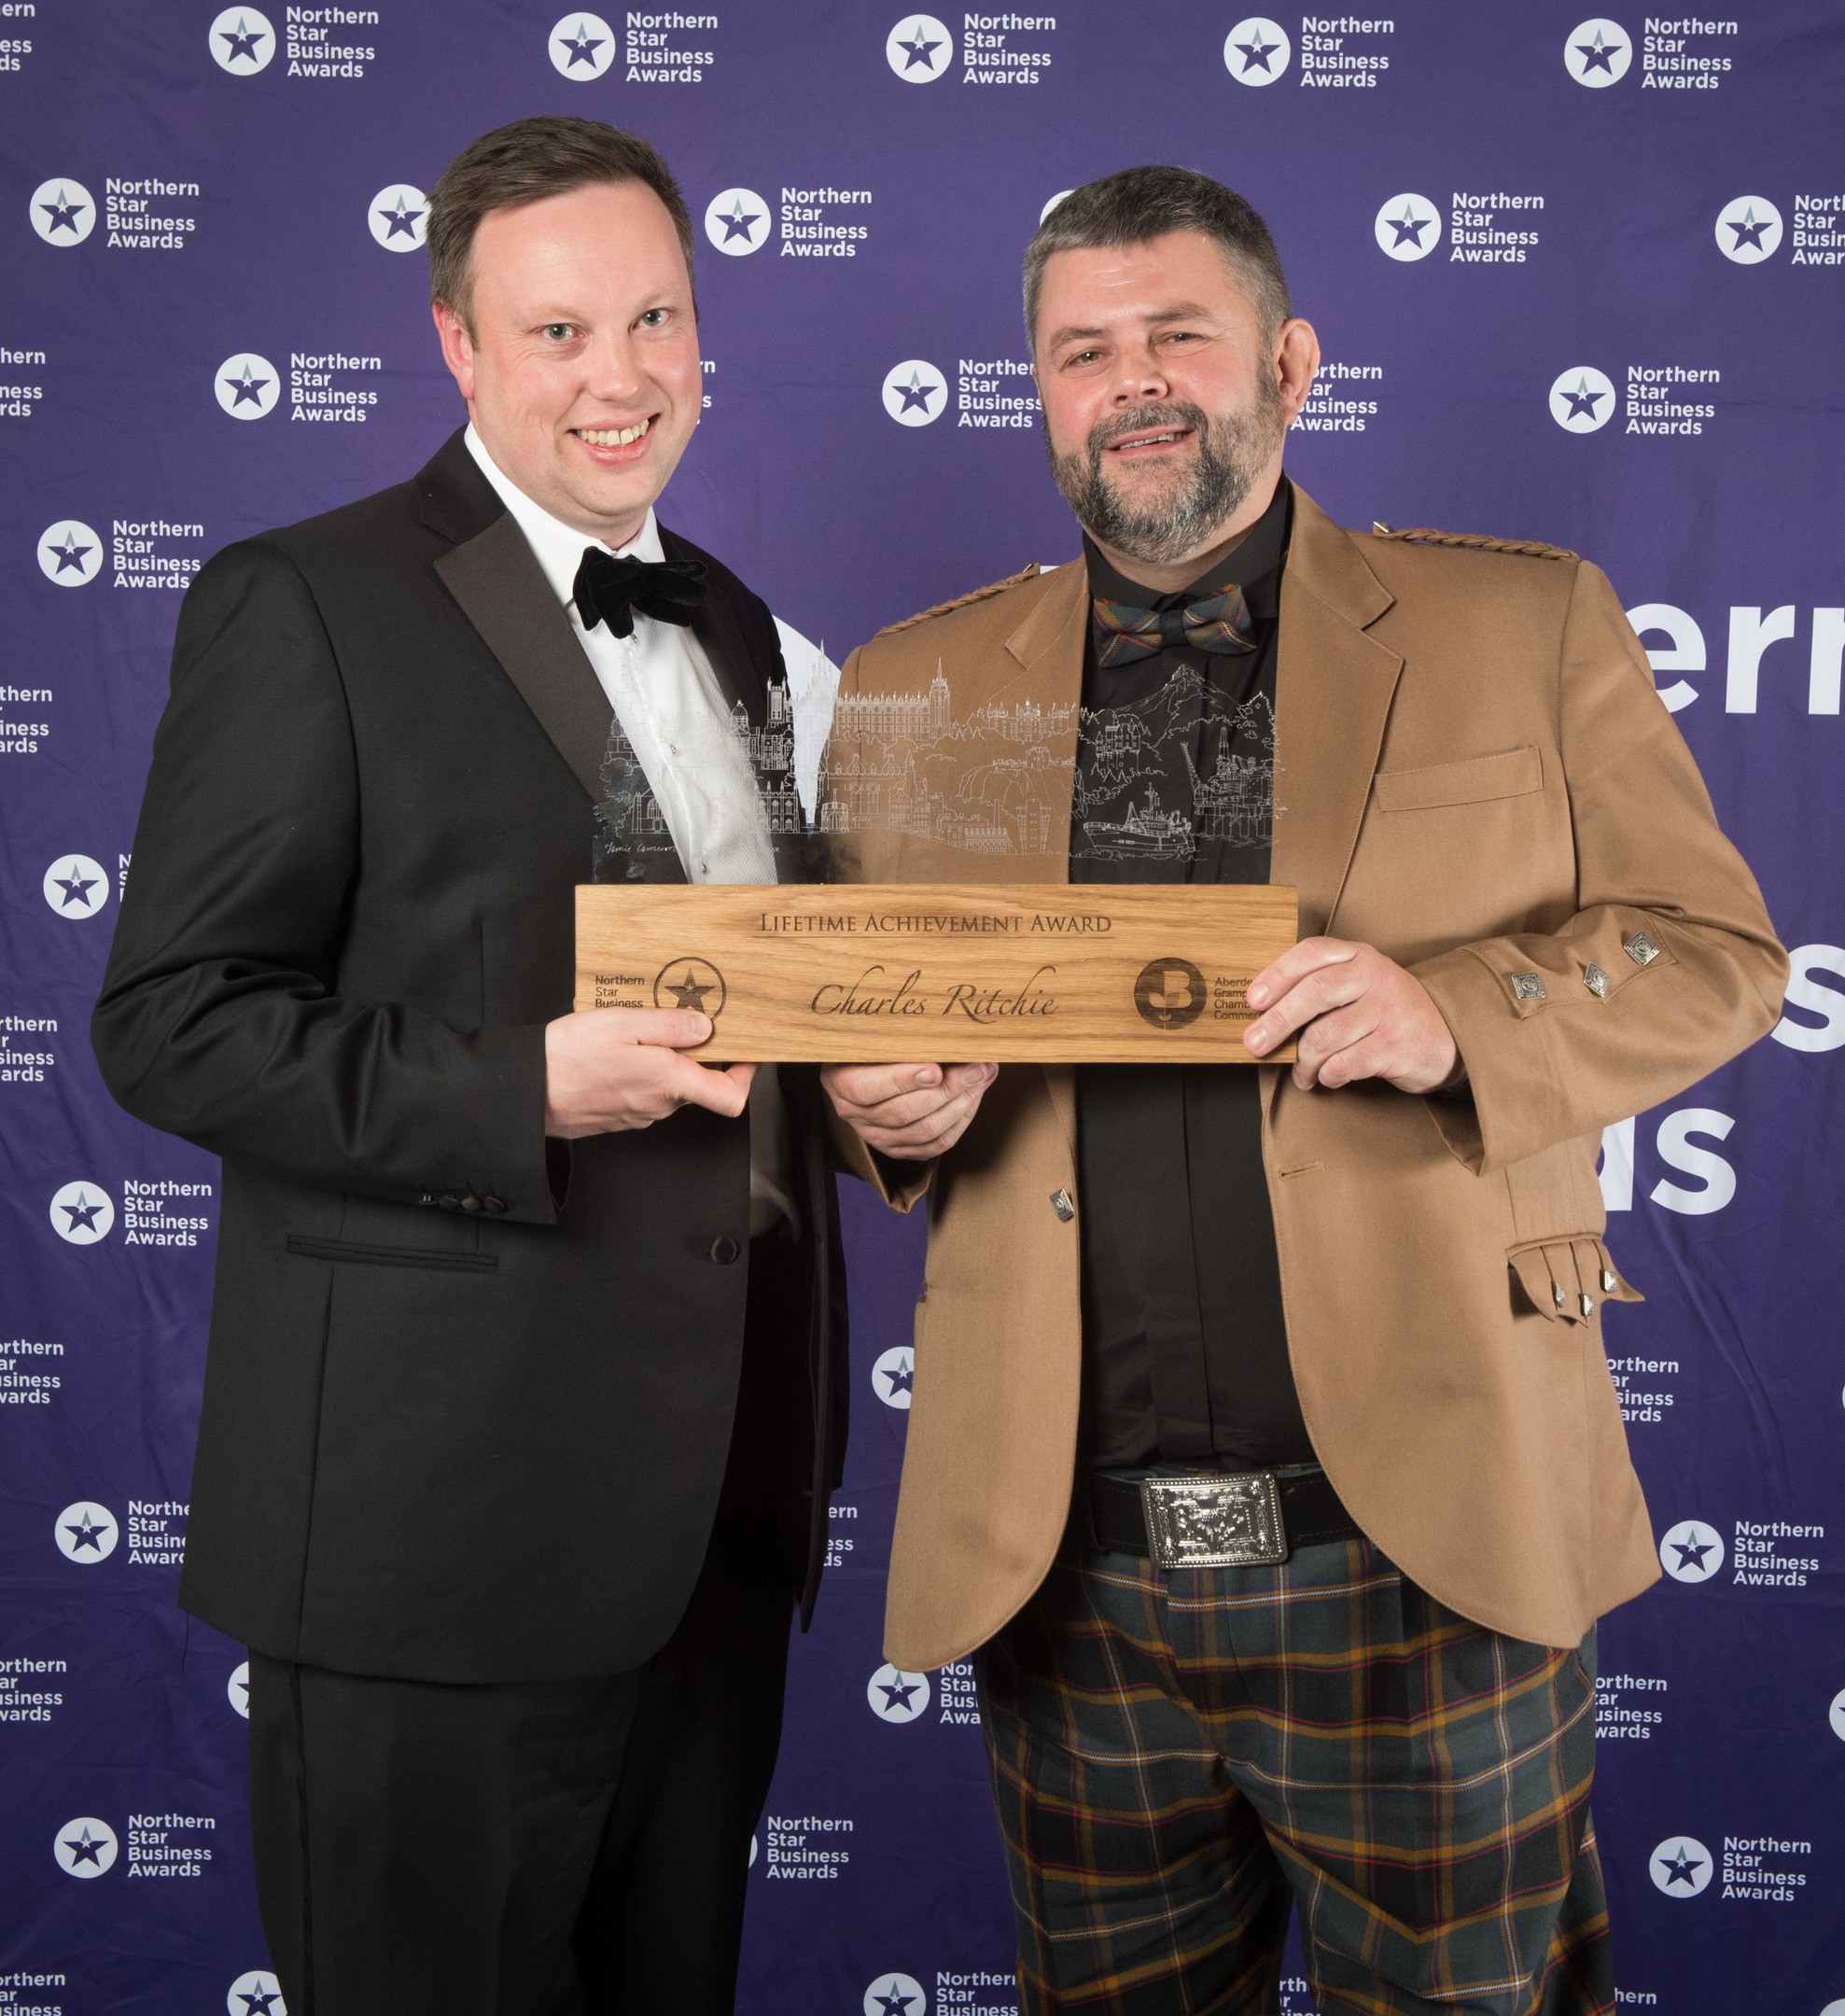 Conrad Ritchie, right, accepts the lifetime achievement award on behalf of his late father, Charles, with awards sponsor Fraser Carr from Cala Homes

Picture by Michal Wachucik / Abermedia